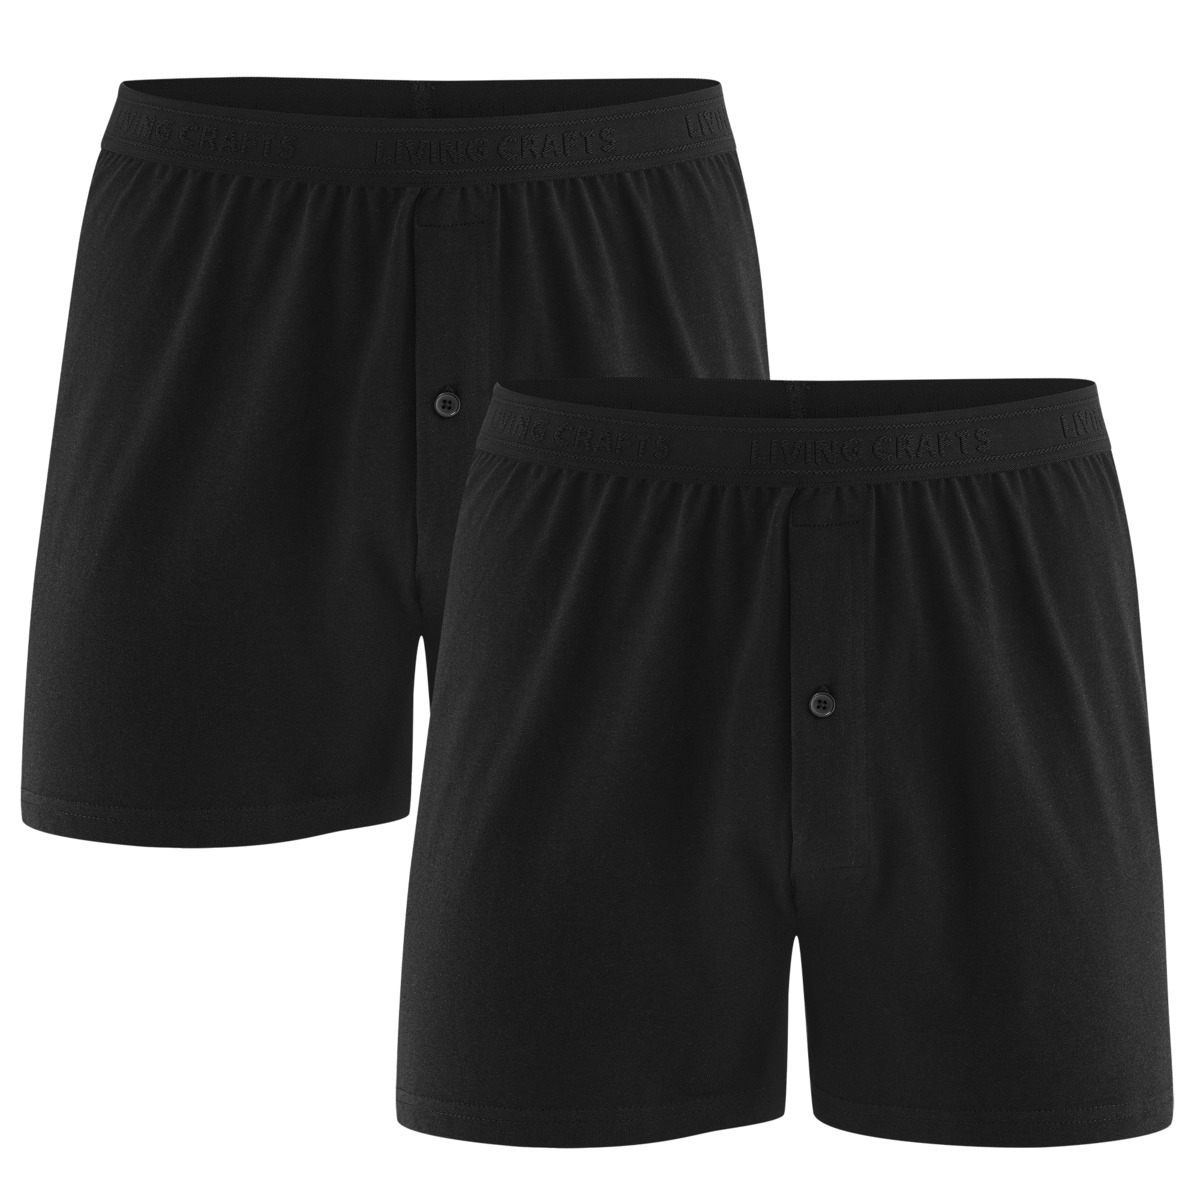 Black Boxer shorts, pack of 2, ETHAN